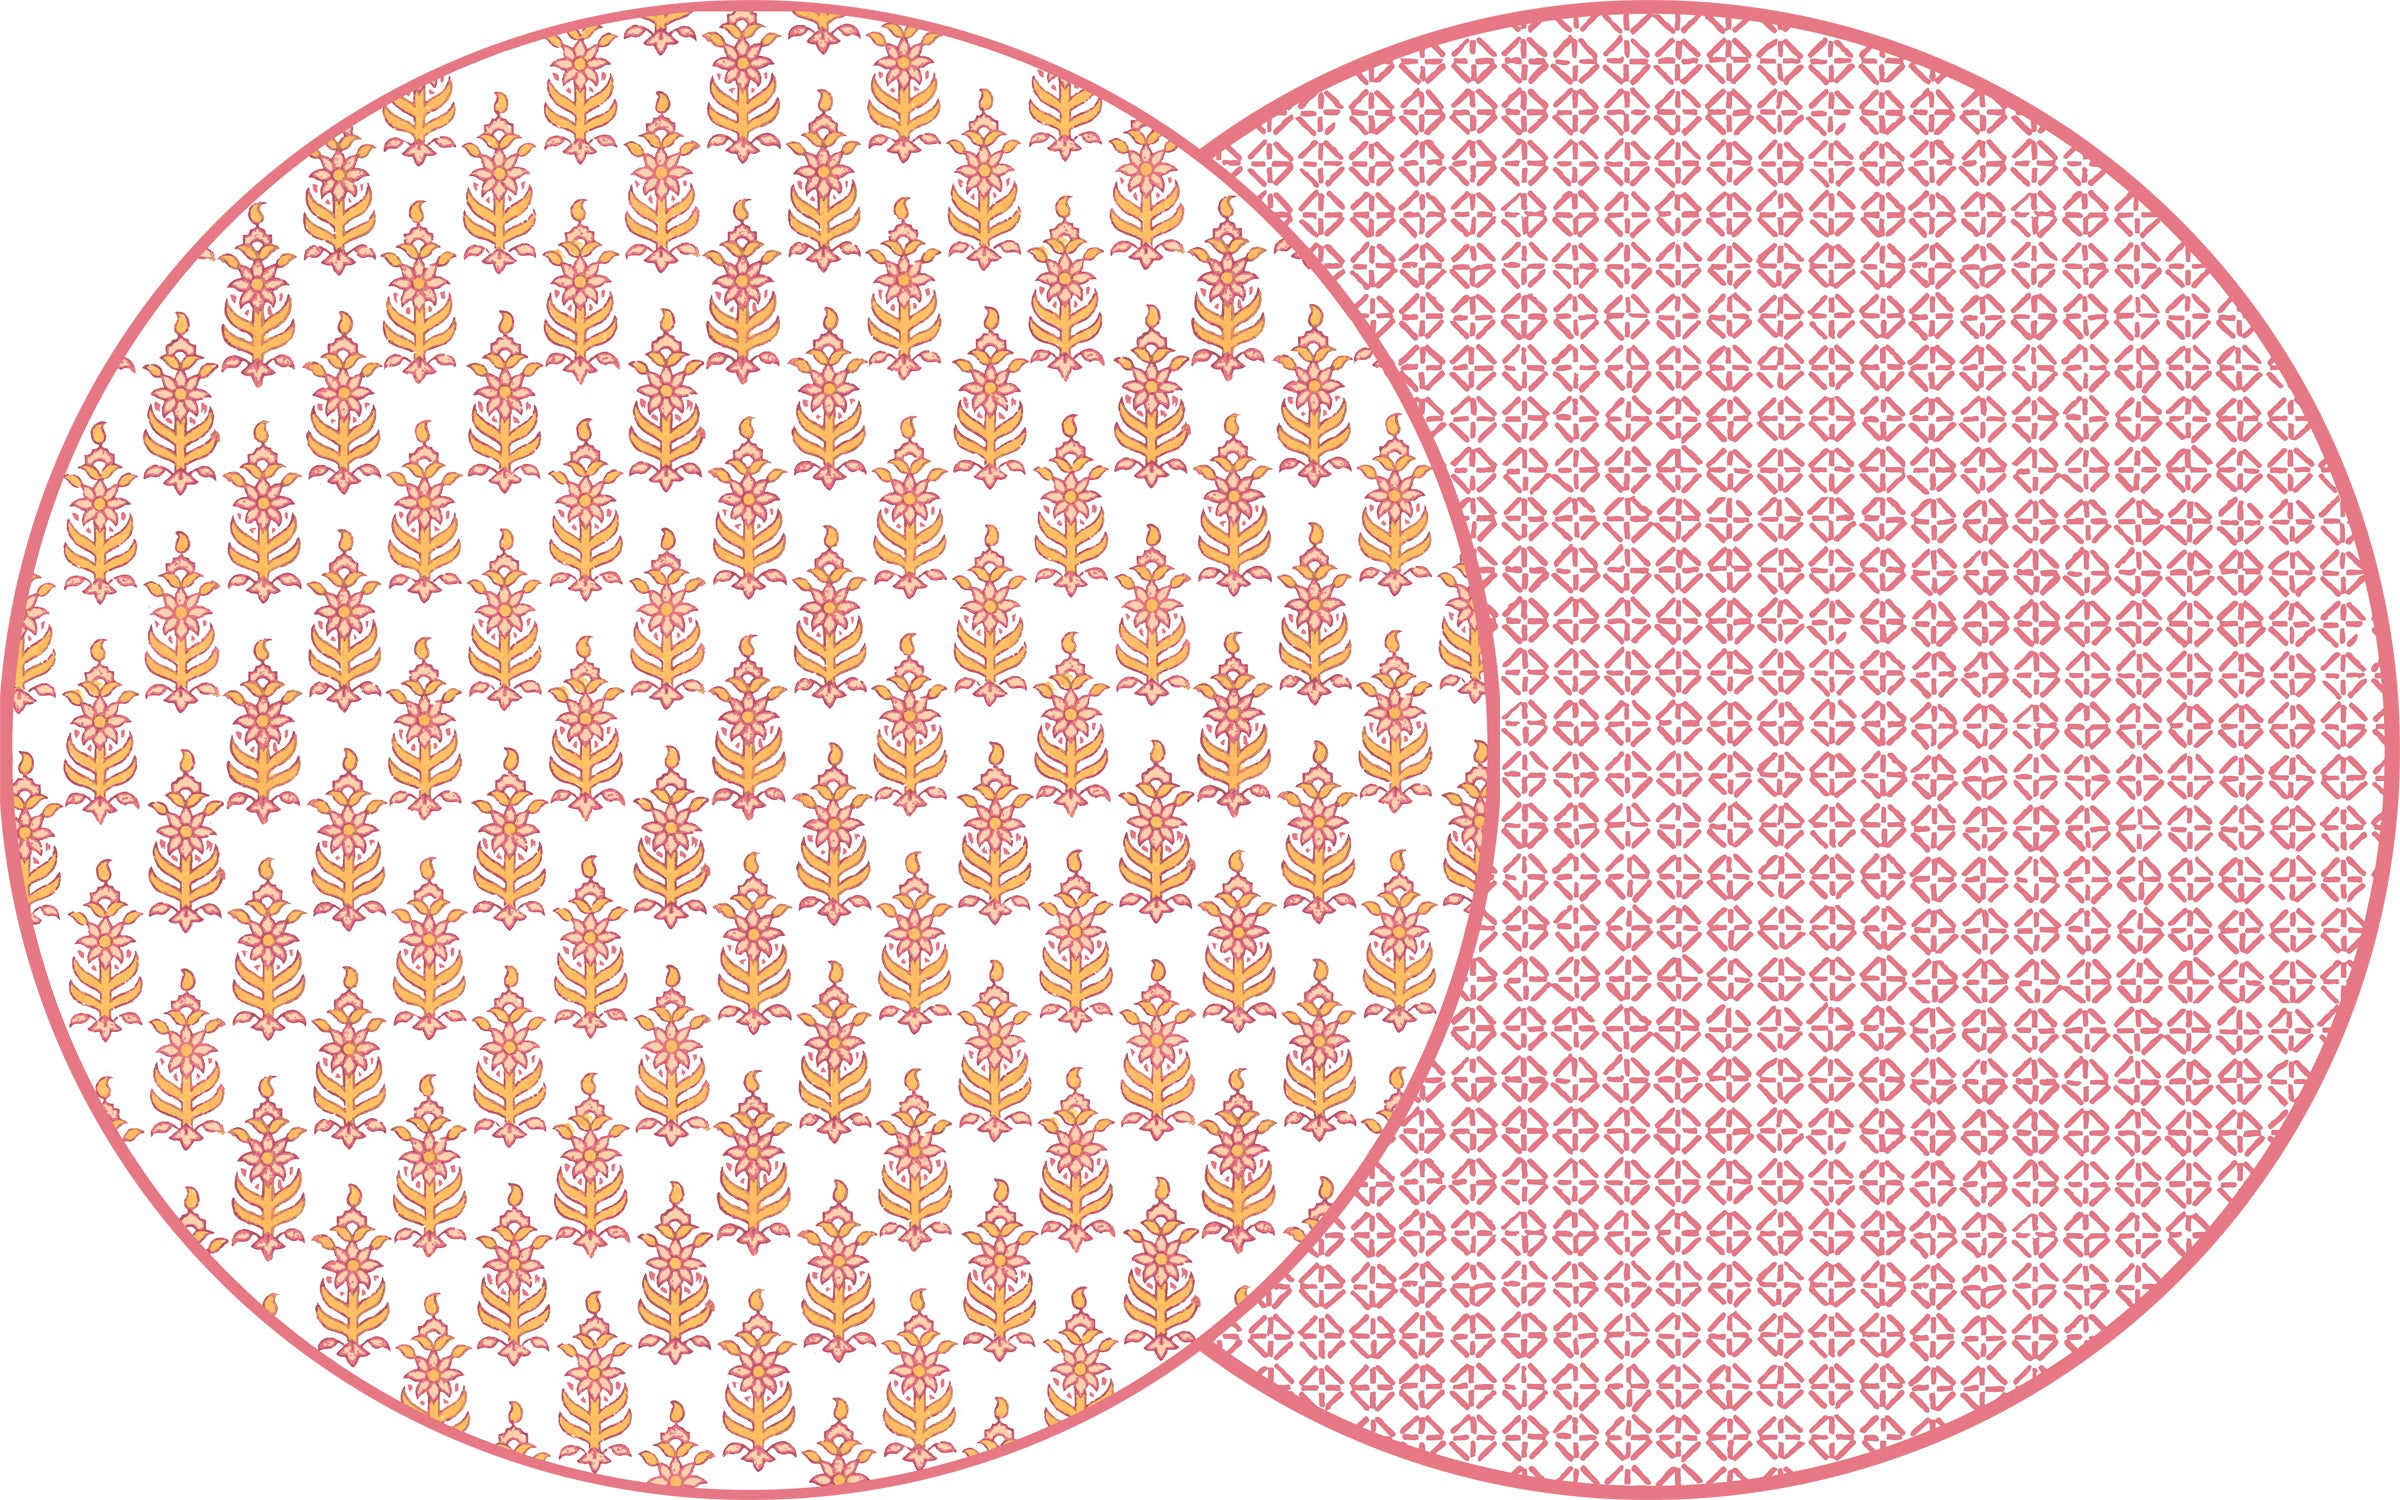 ROUND TWO SIDED RAJ & JAIPUR PLACEMATS